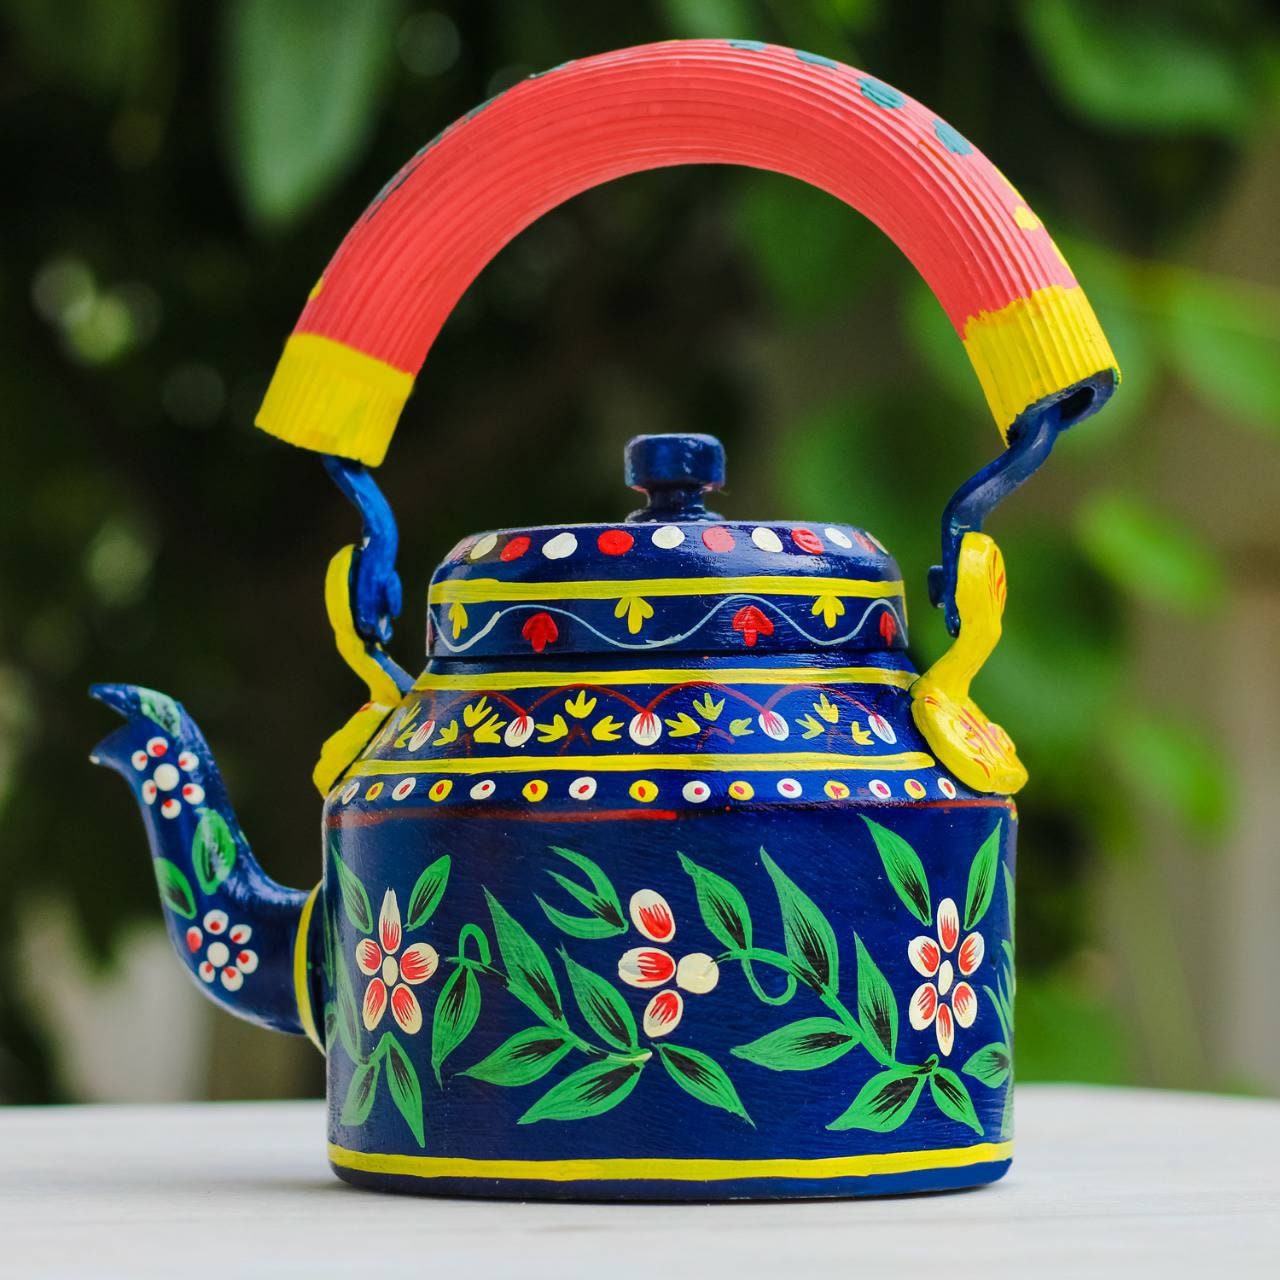 Hand Painted Tea Kettle Pink City, Festive Gift, Gift for Her